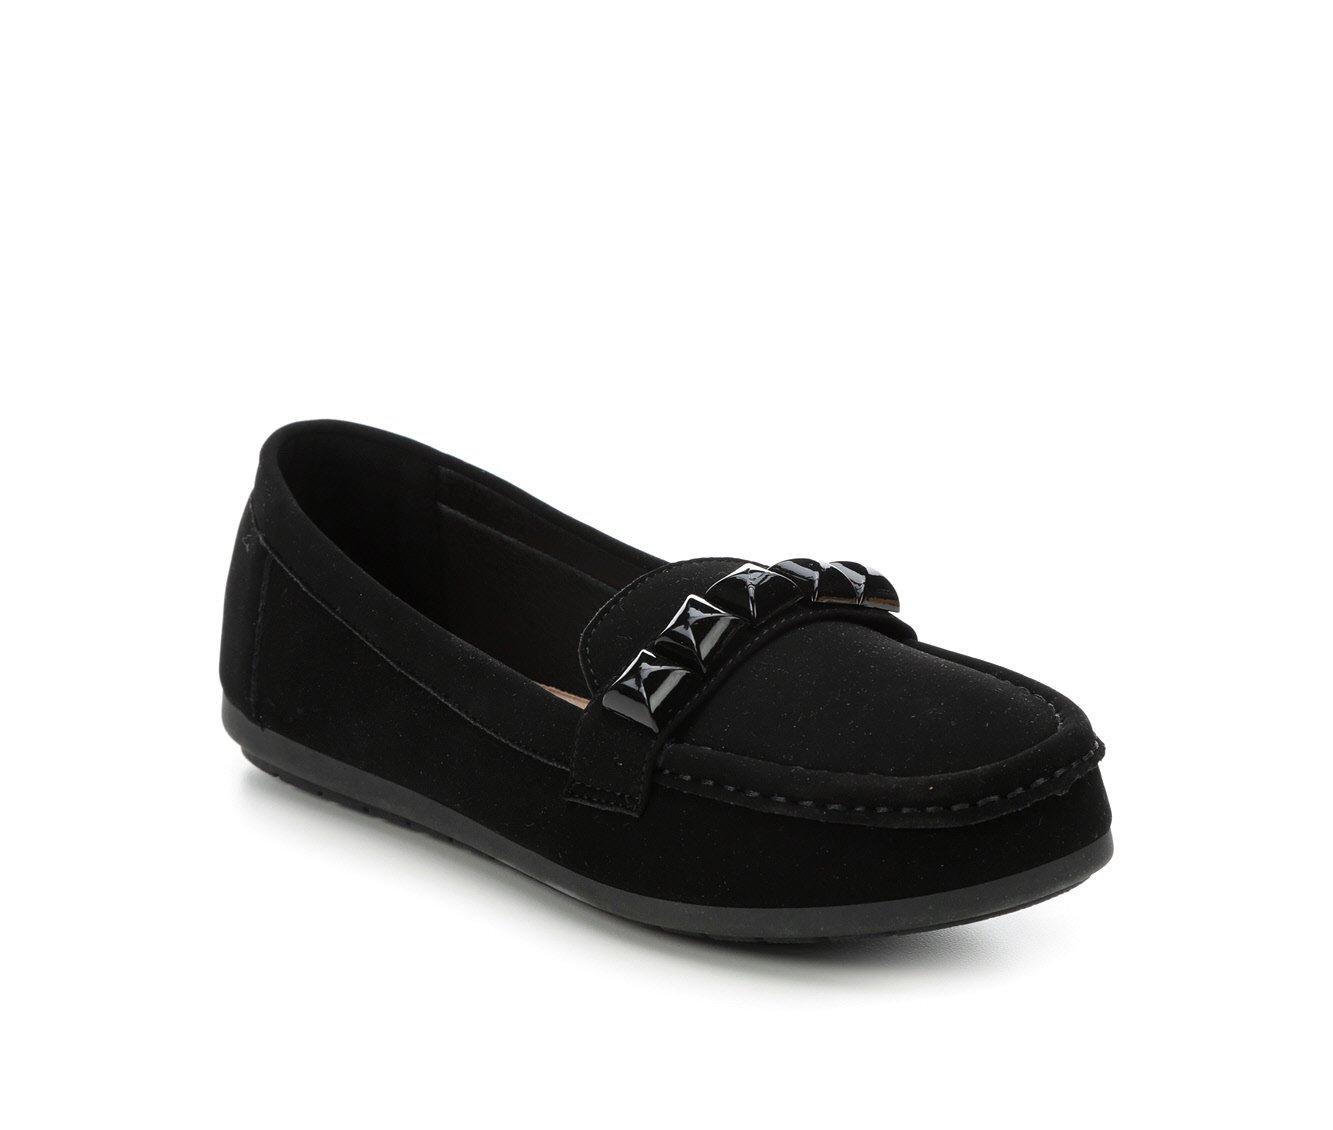 Women's Daisy Fuentes Dasia Loafers